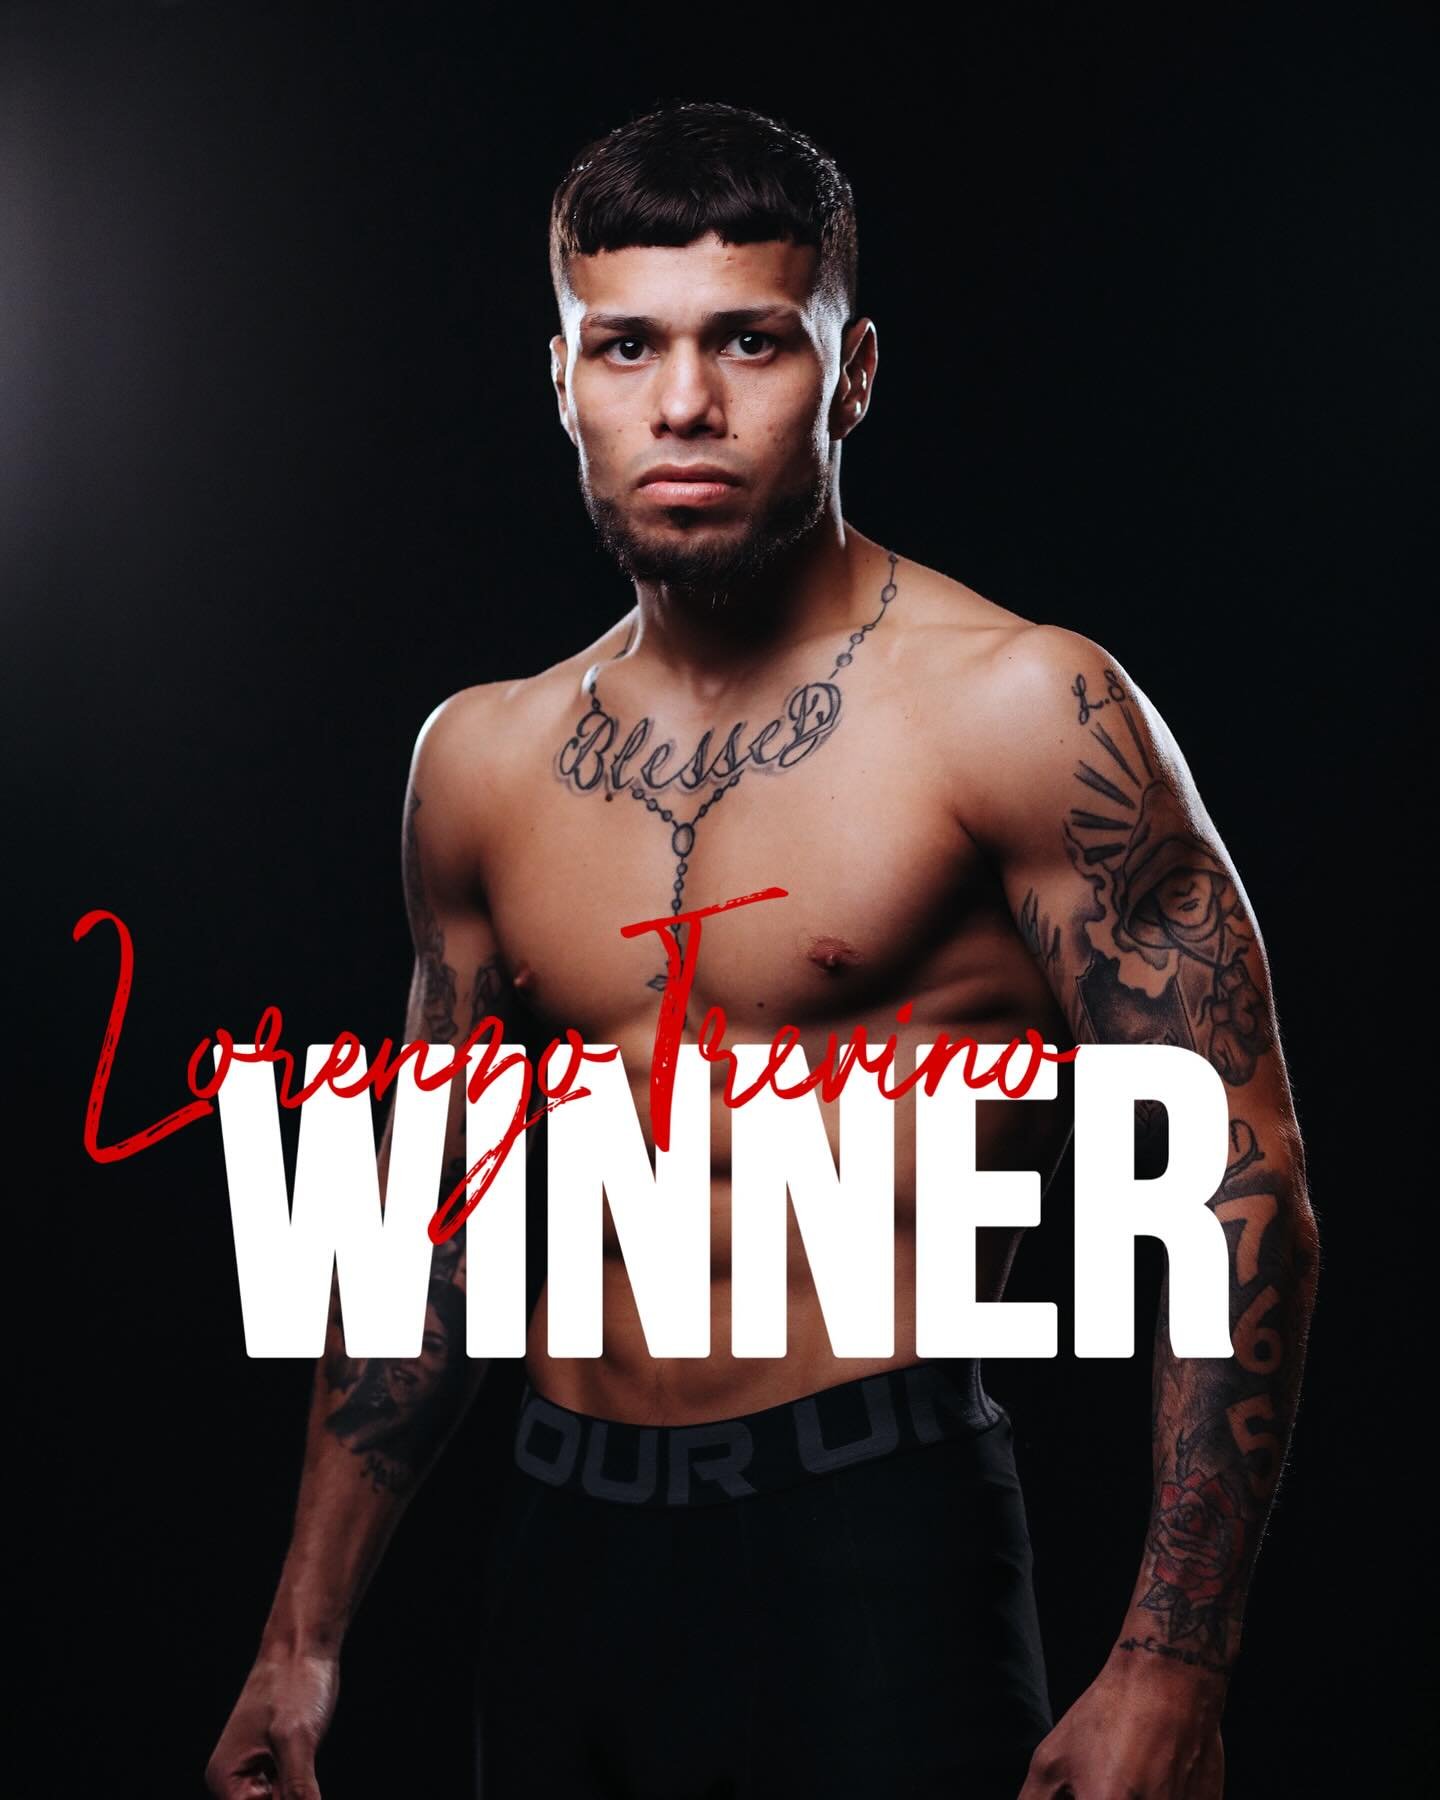 Our co-main event @lorenzo_trevino wins by TKO referee stoppage by strikes!